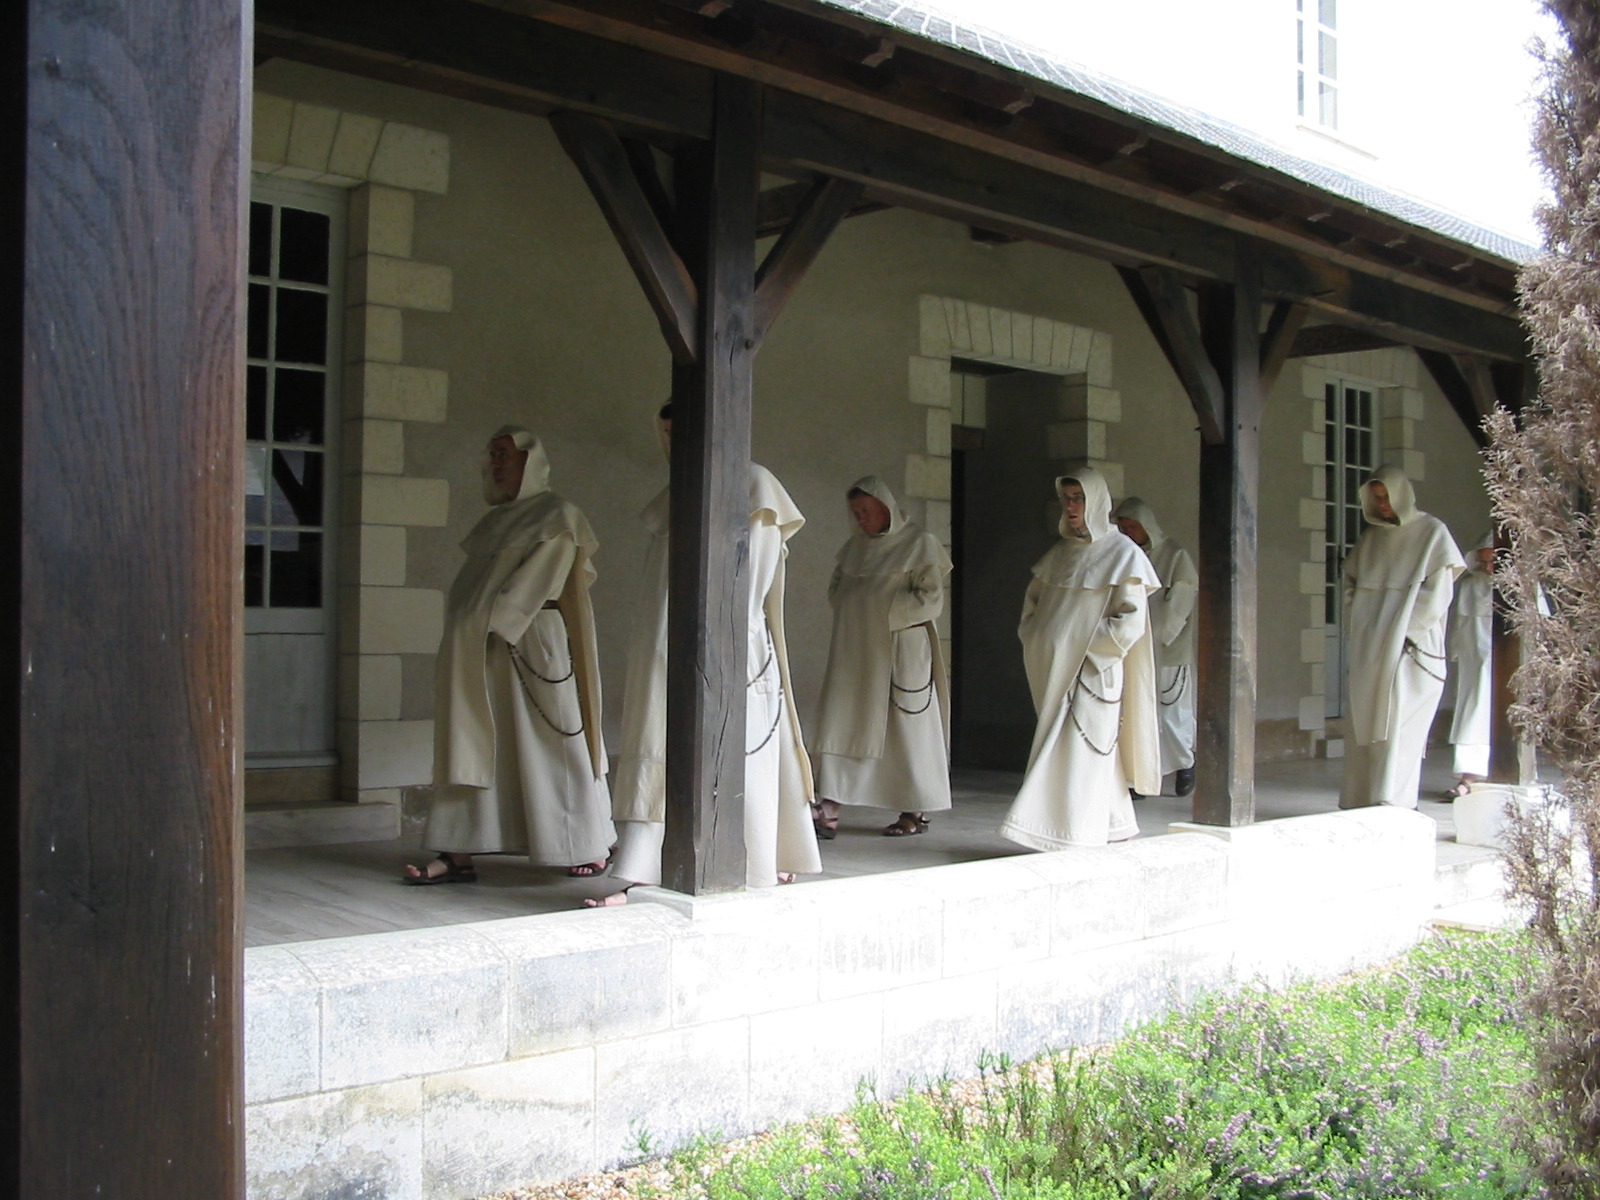 Procession in the cloister